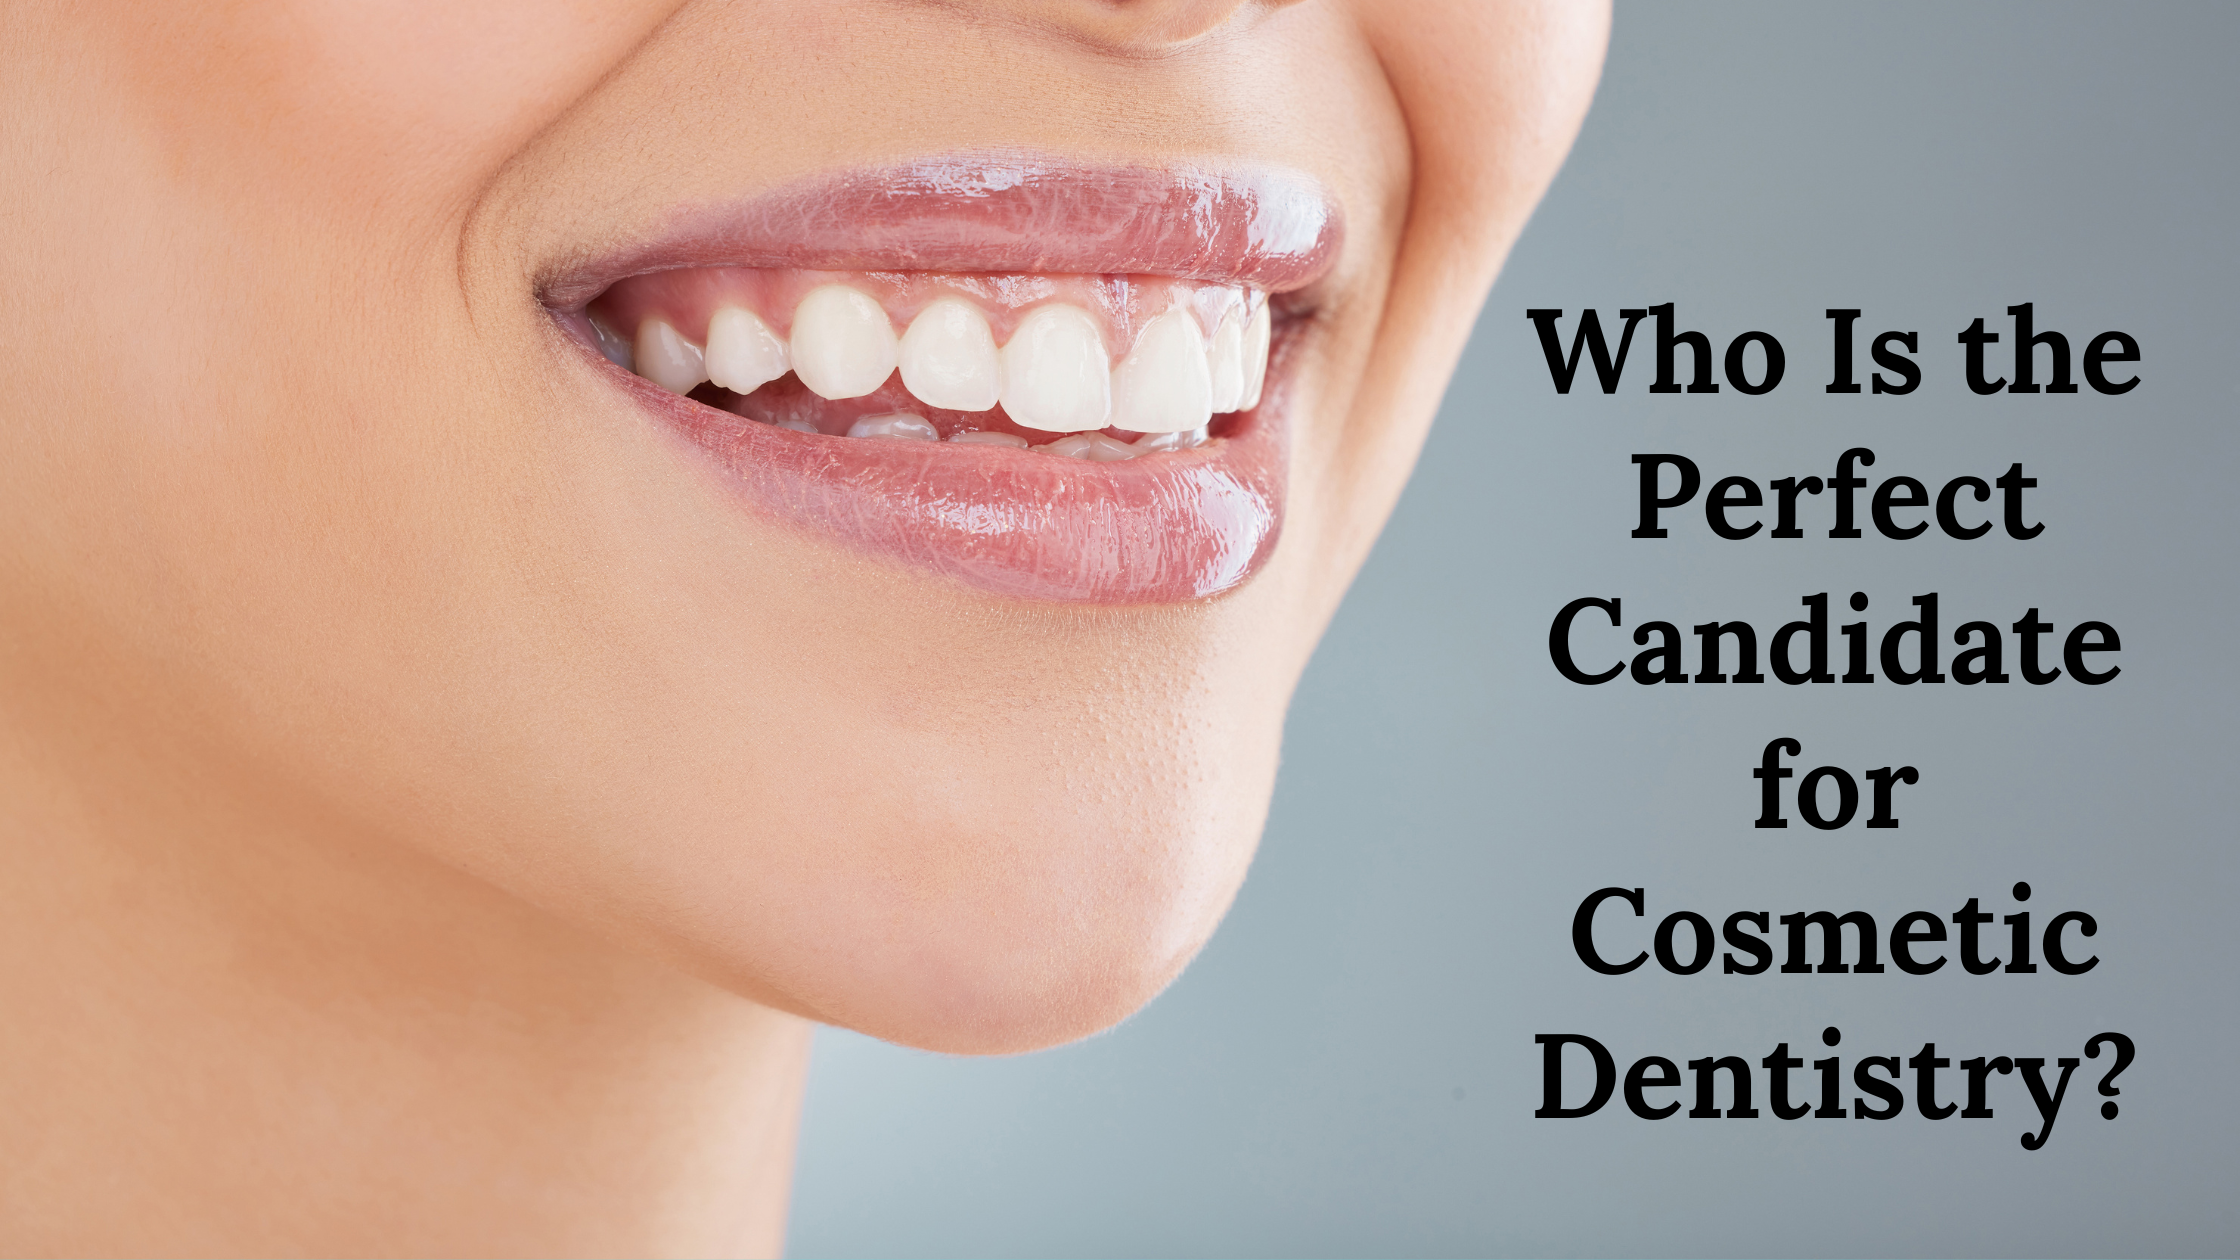 Who Is the Perfect Candidate for Cosmetic Dentistry?